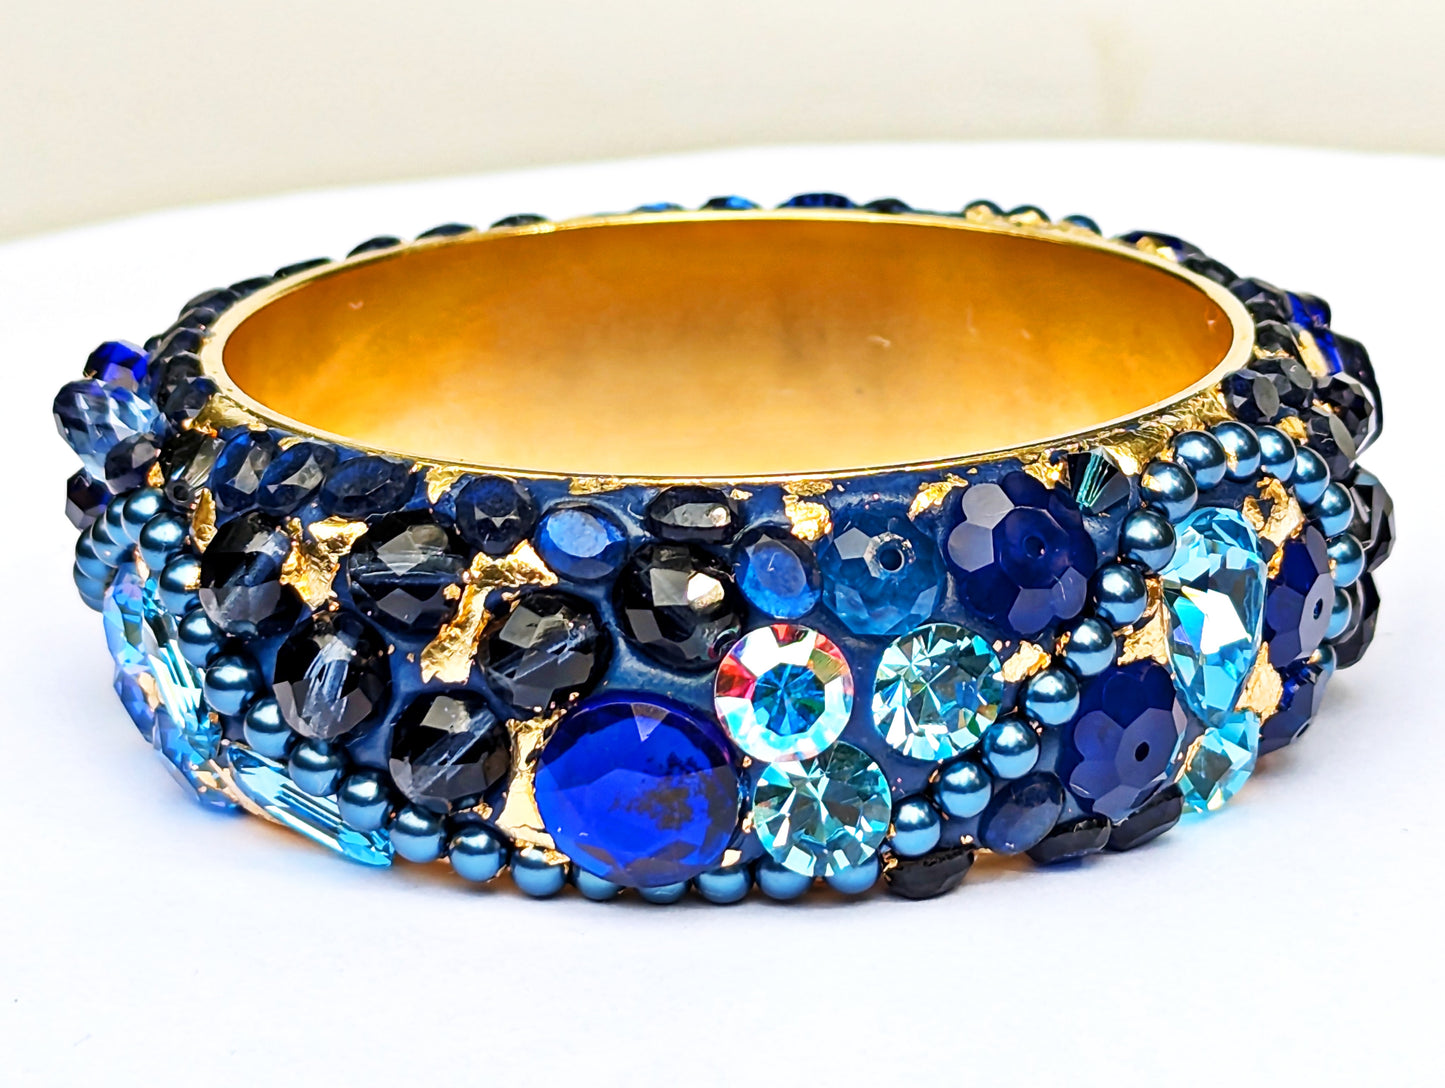 Blue and Gold Bangle Bracelet Hand Made Vintage beads one of one Sugar Gay Isber USA